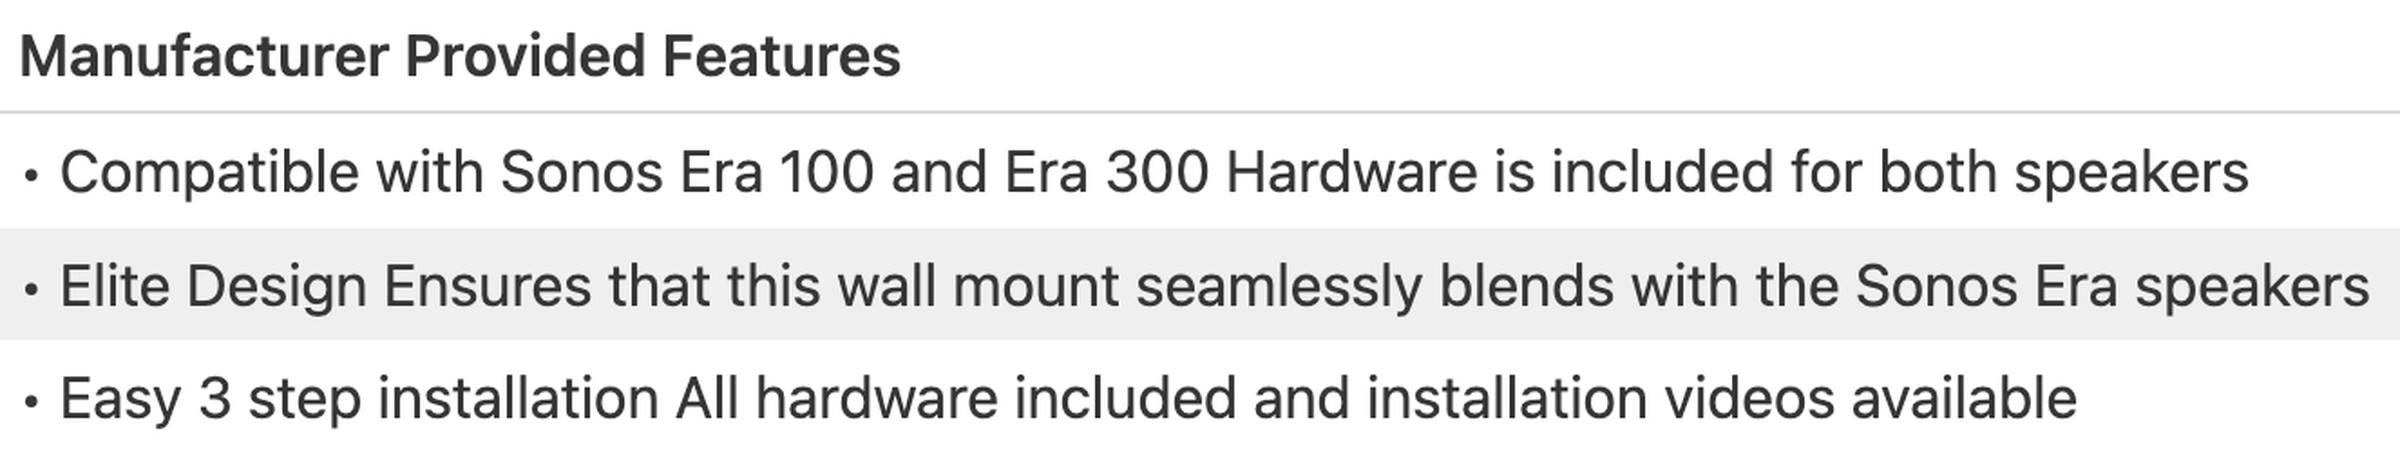 A screenshot of a document confirming the Era 300 and Era 100 speaker branding from Sonos.